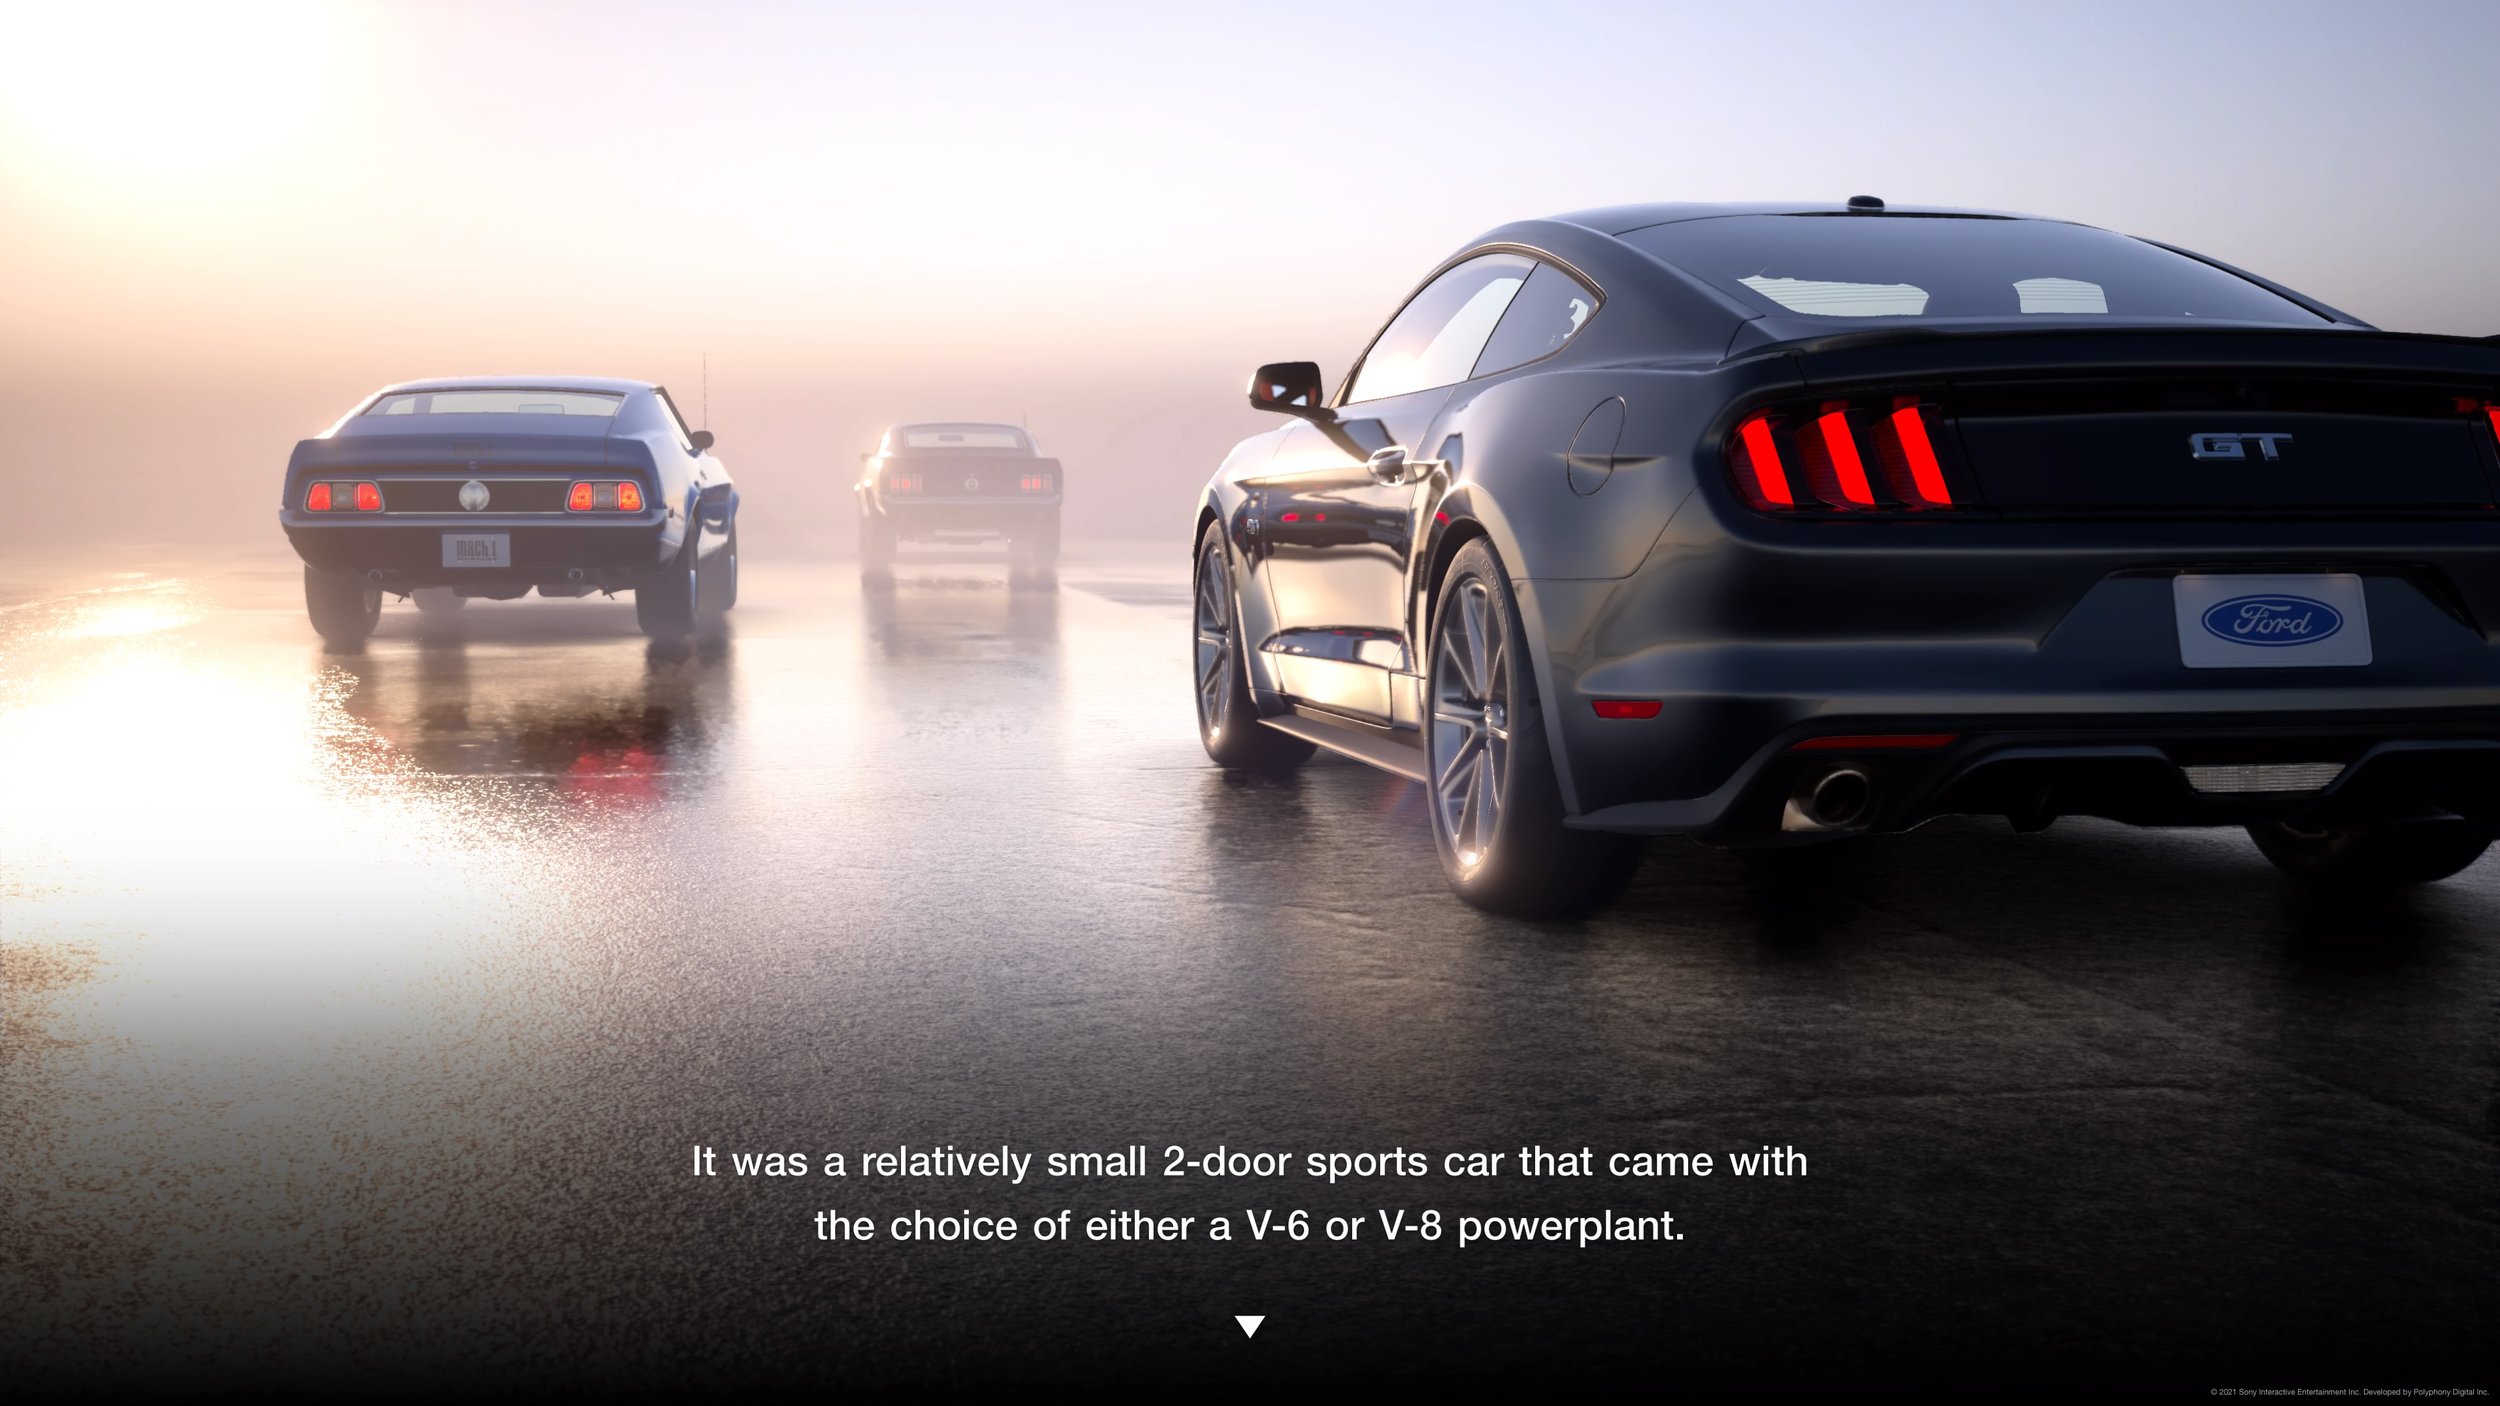 Gran Turismo 7 Hands-On: Slow In, Fast Out - CNET